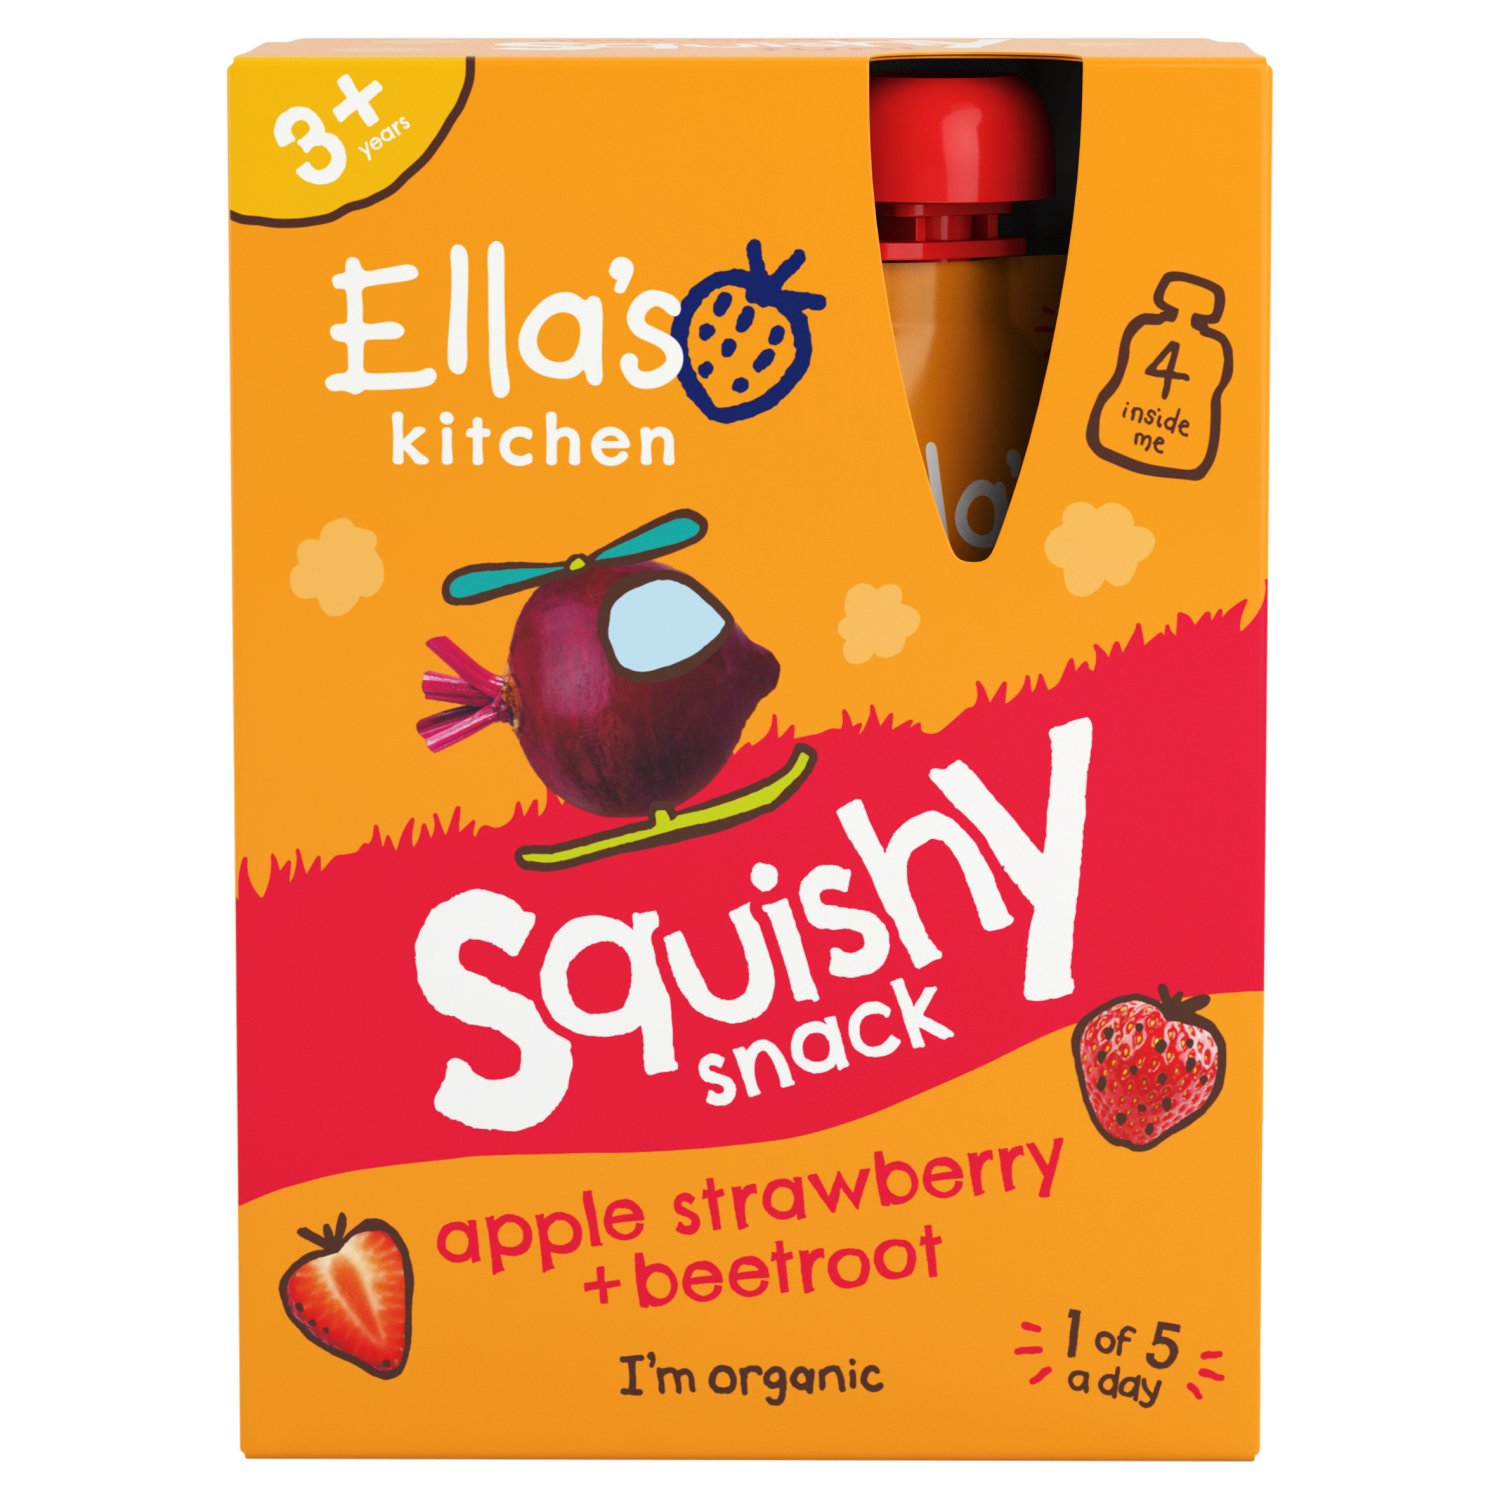 Ella's Kitchen Organic Strawberry and Beetroot Squishy Snack 3+ Years (100 g)